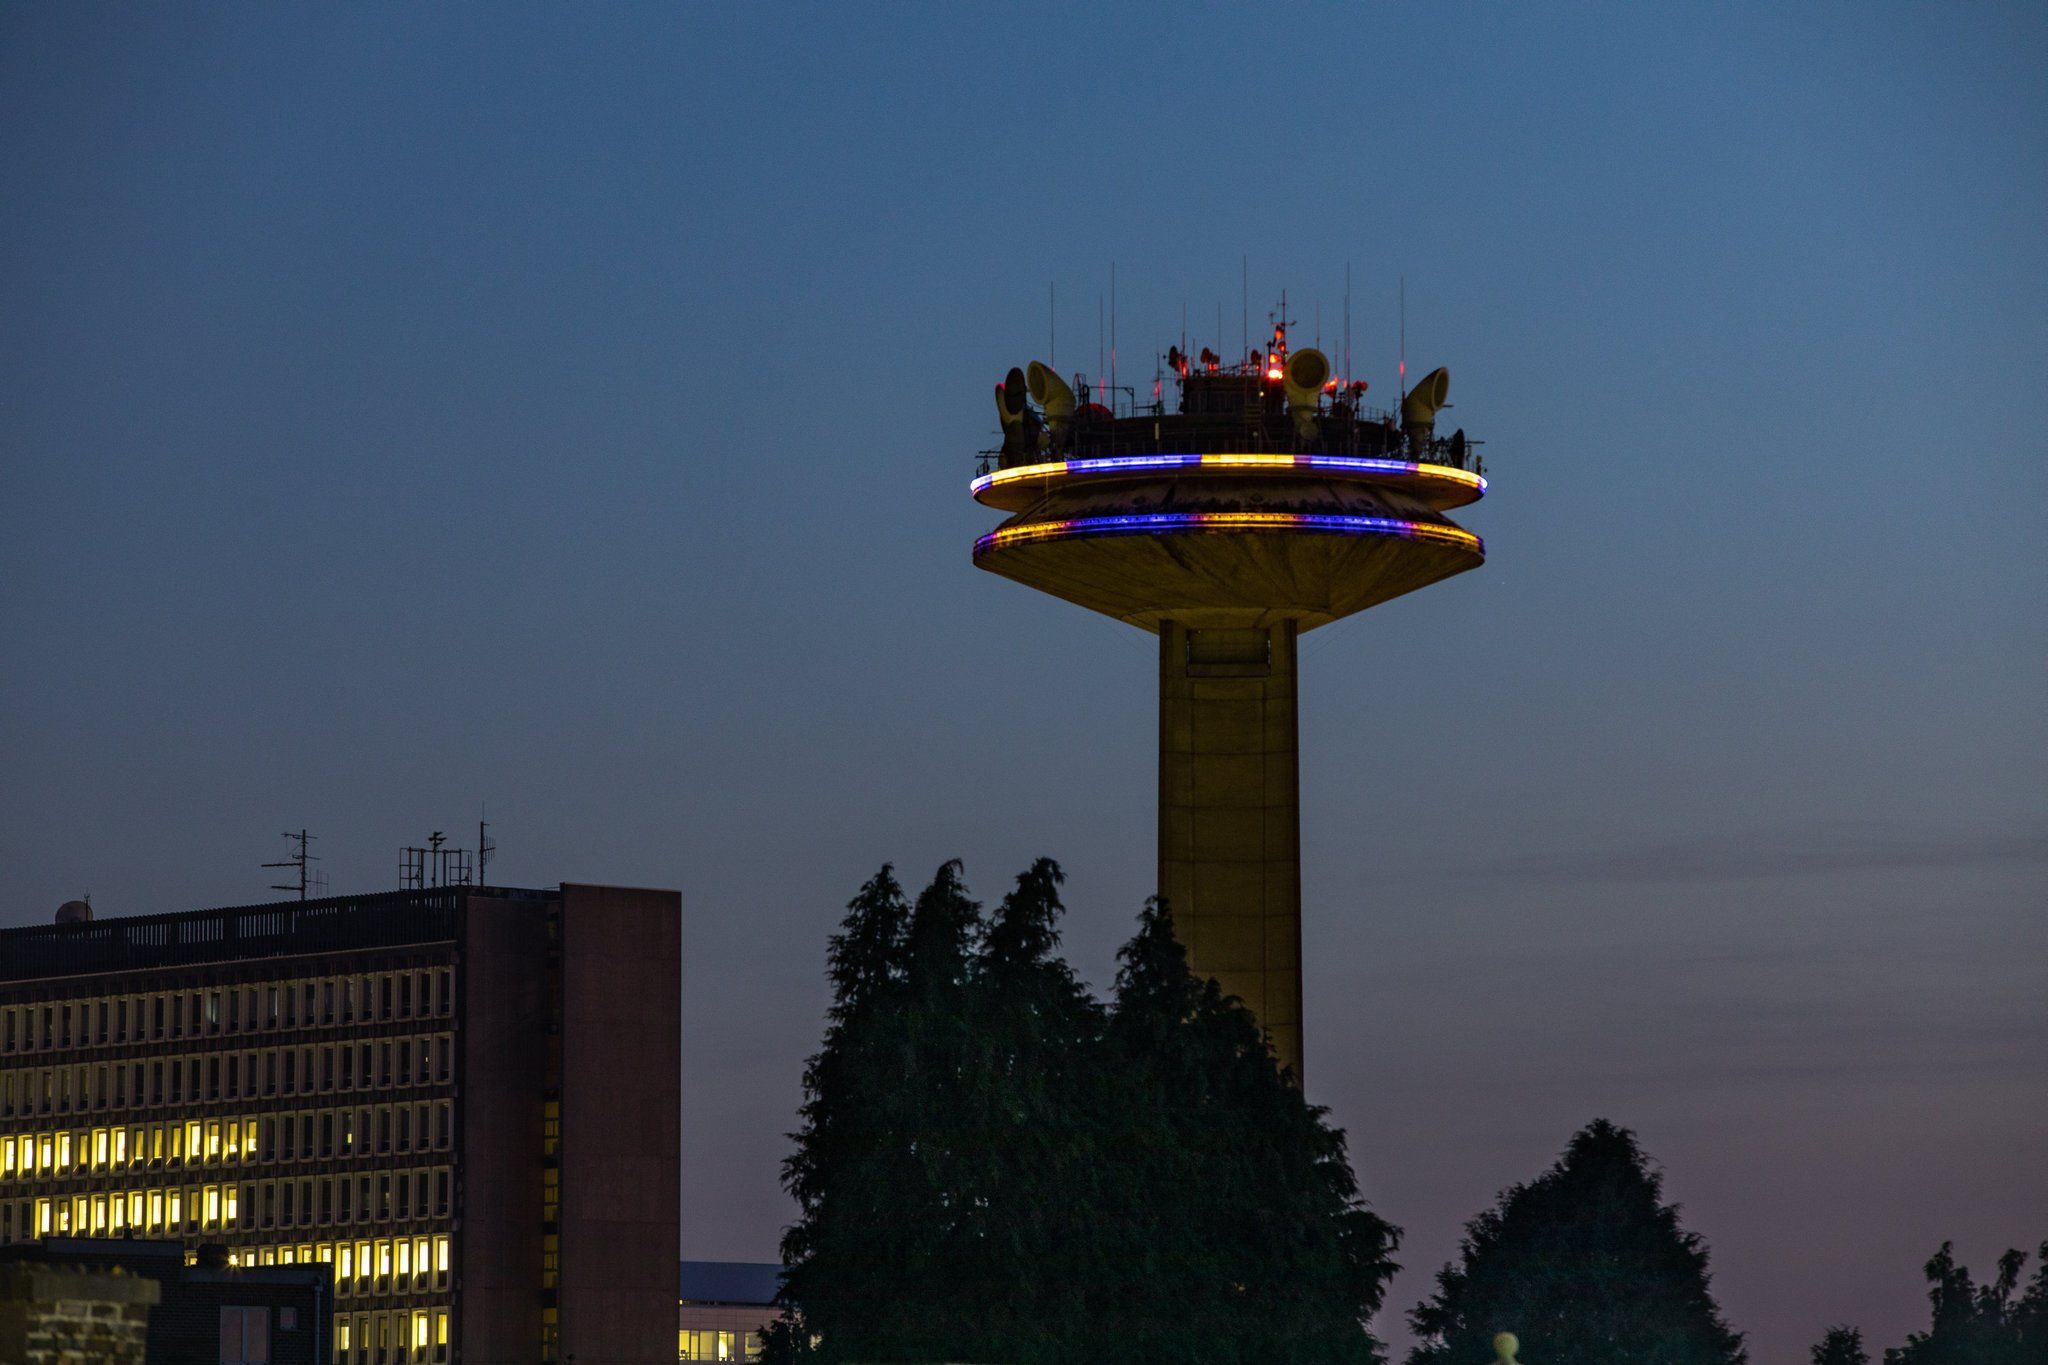 The landmark TV Tower in Brussels is lit up in the colours of the Ukrainian flag as a sign of support